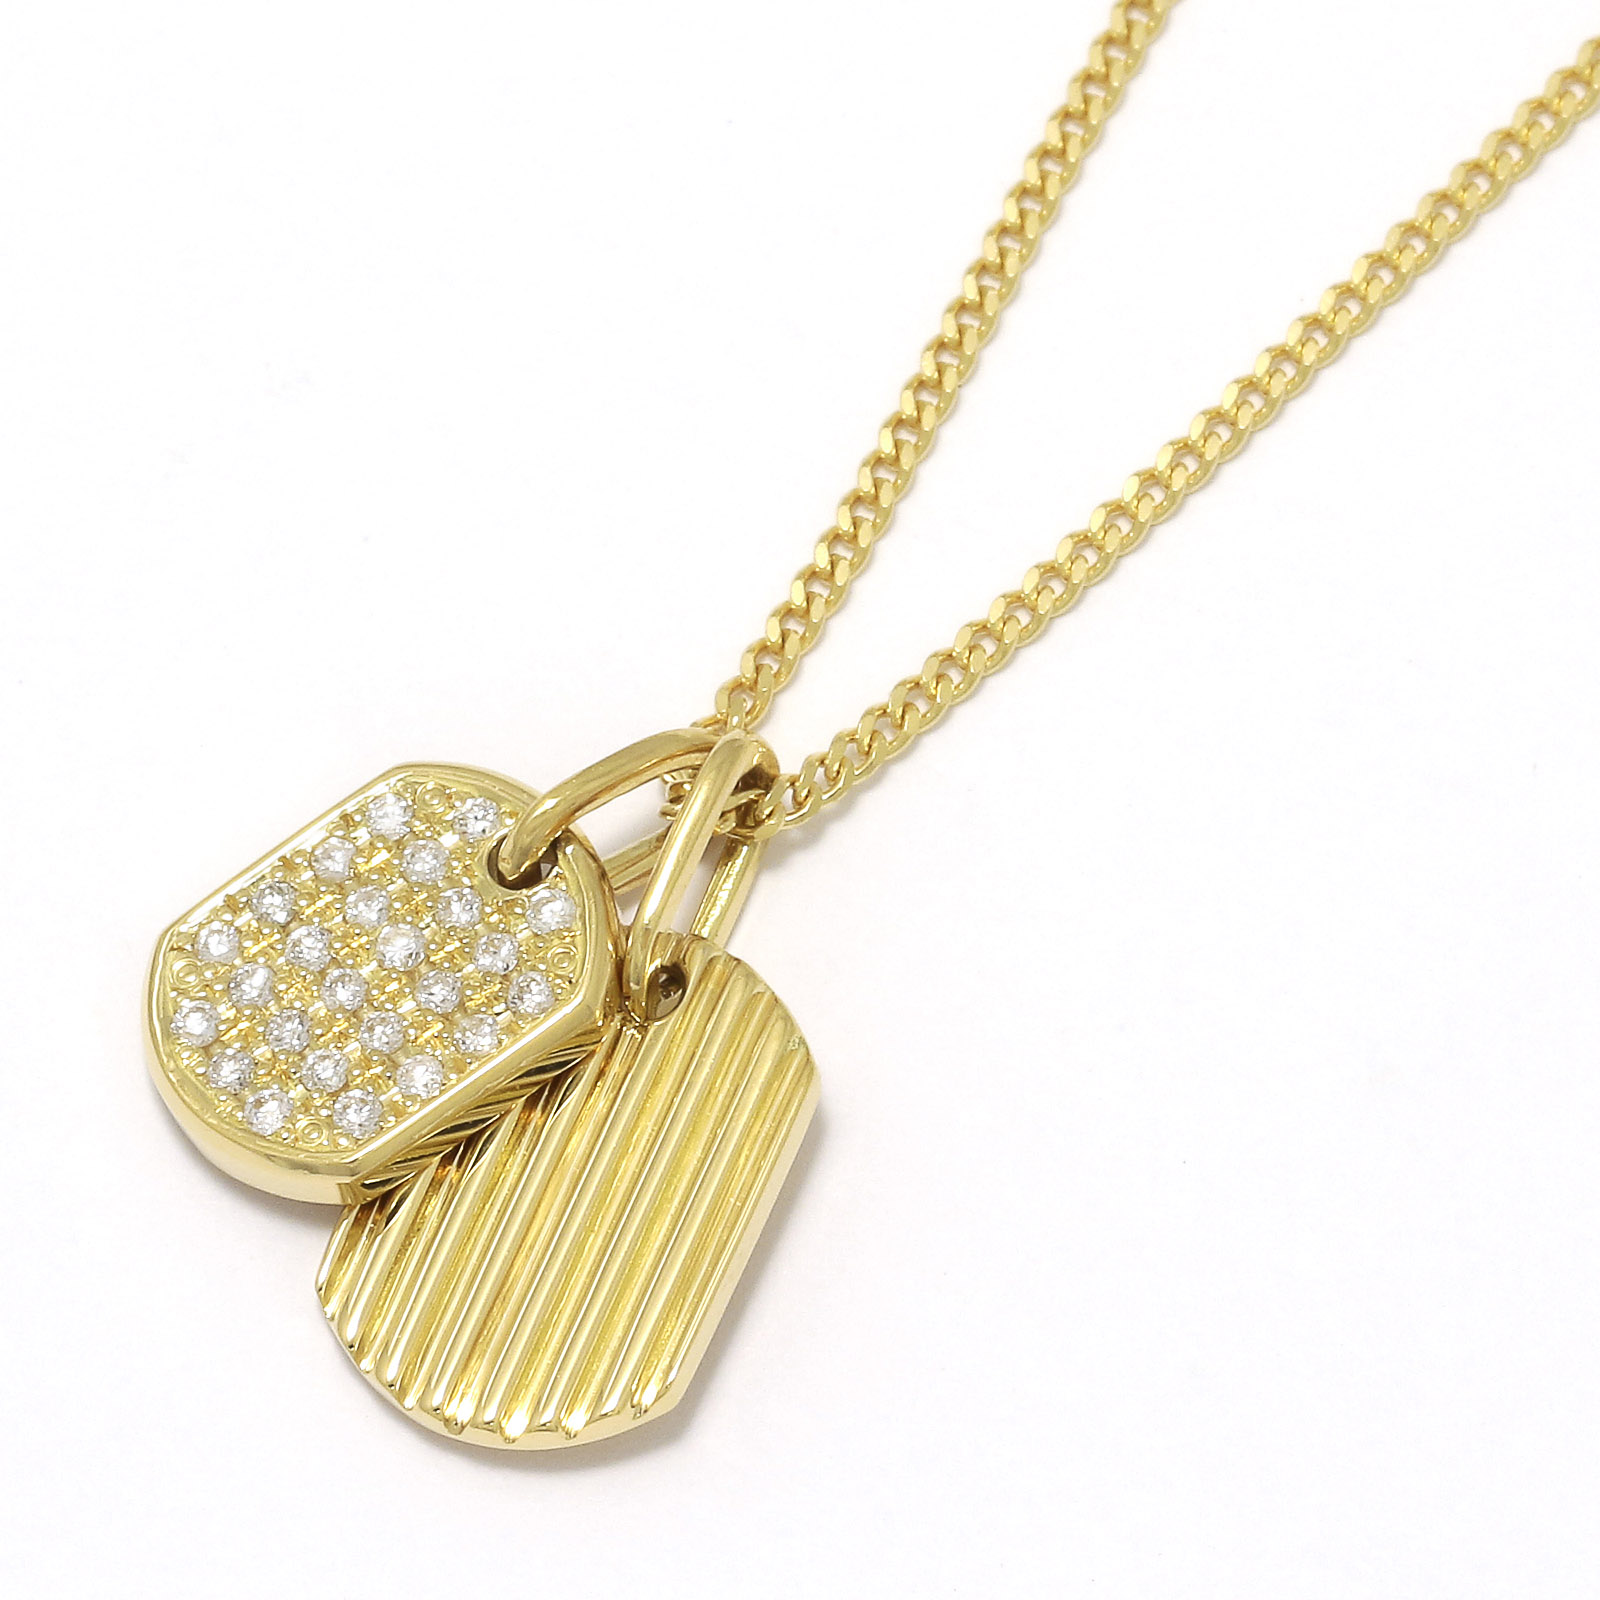 Small Dog Tag Necklace - K18Yellow Gold w/Diamond